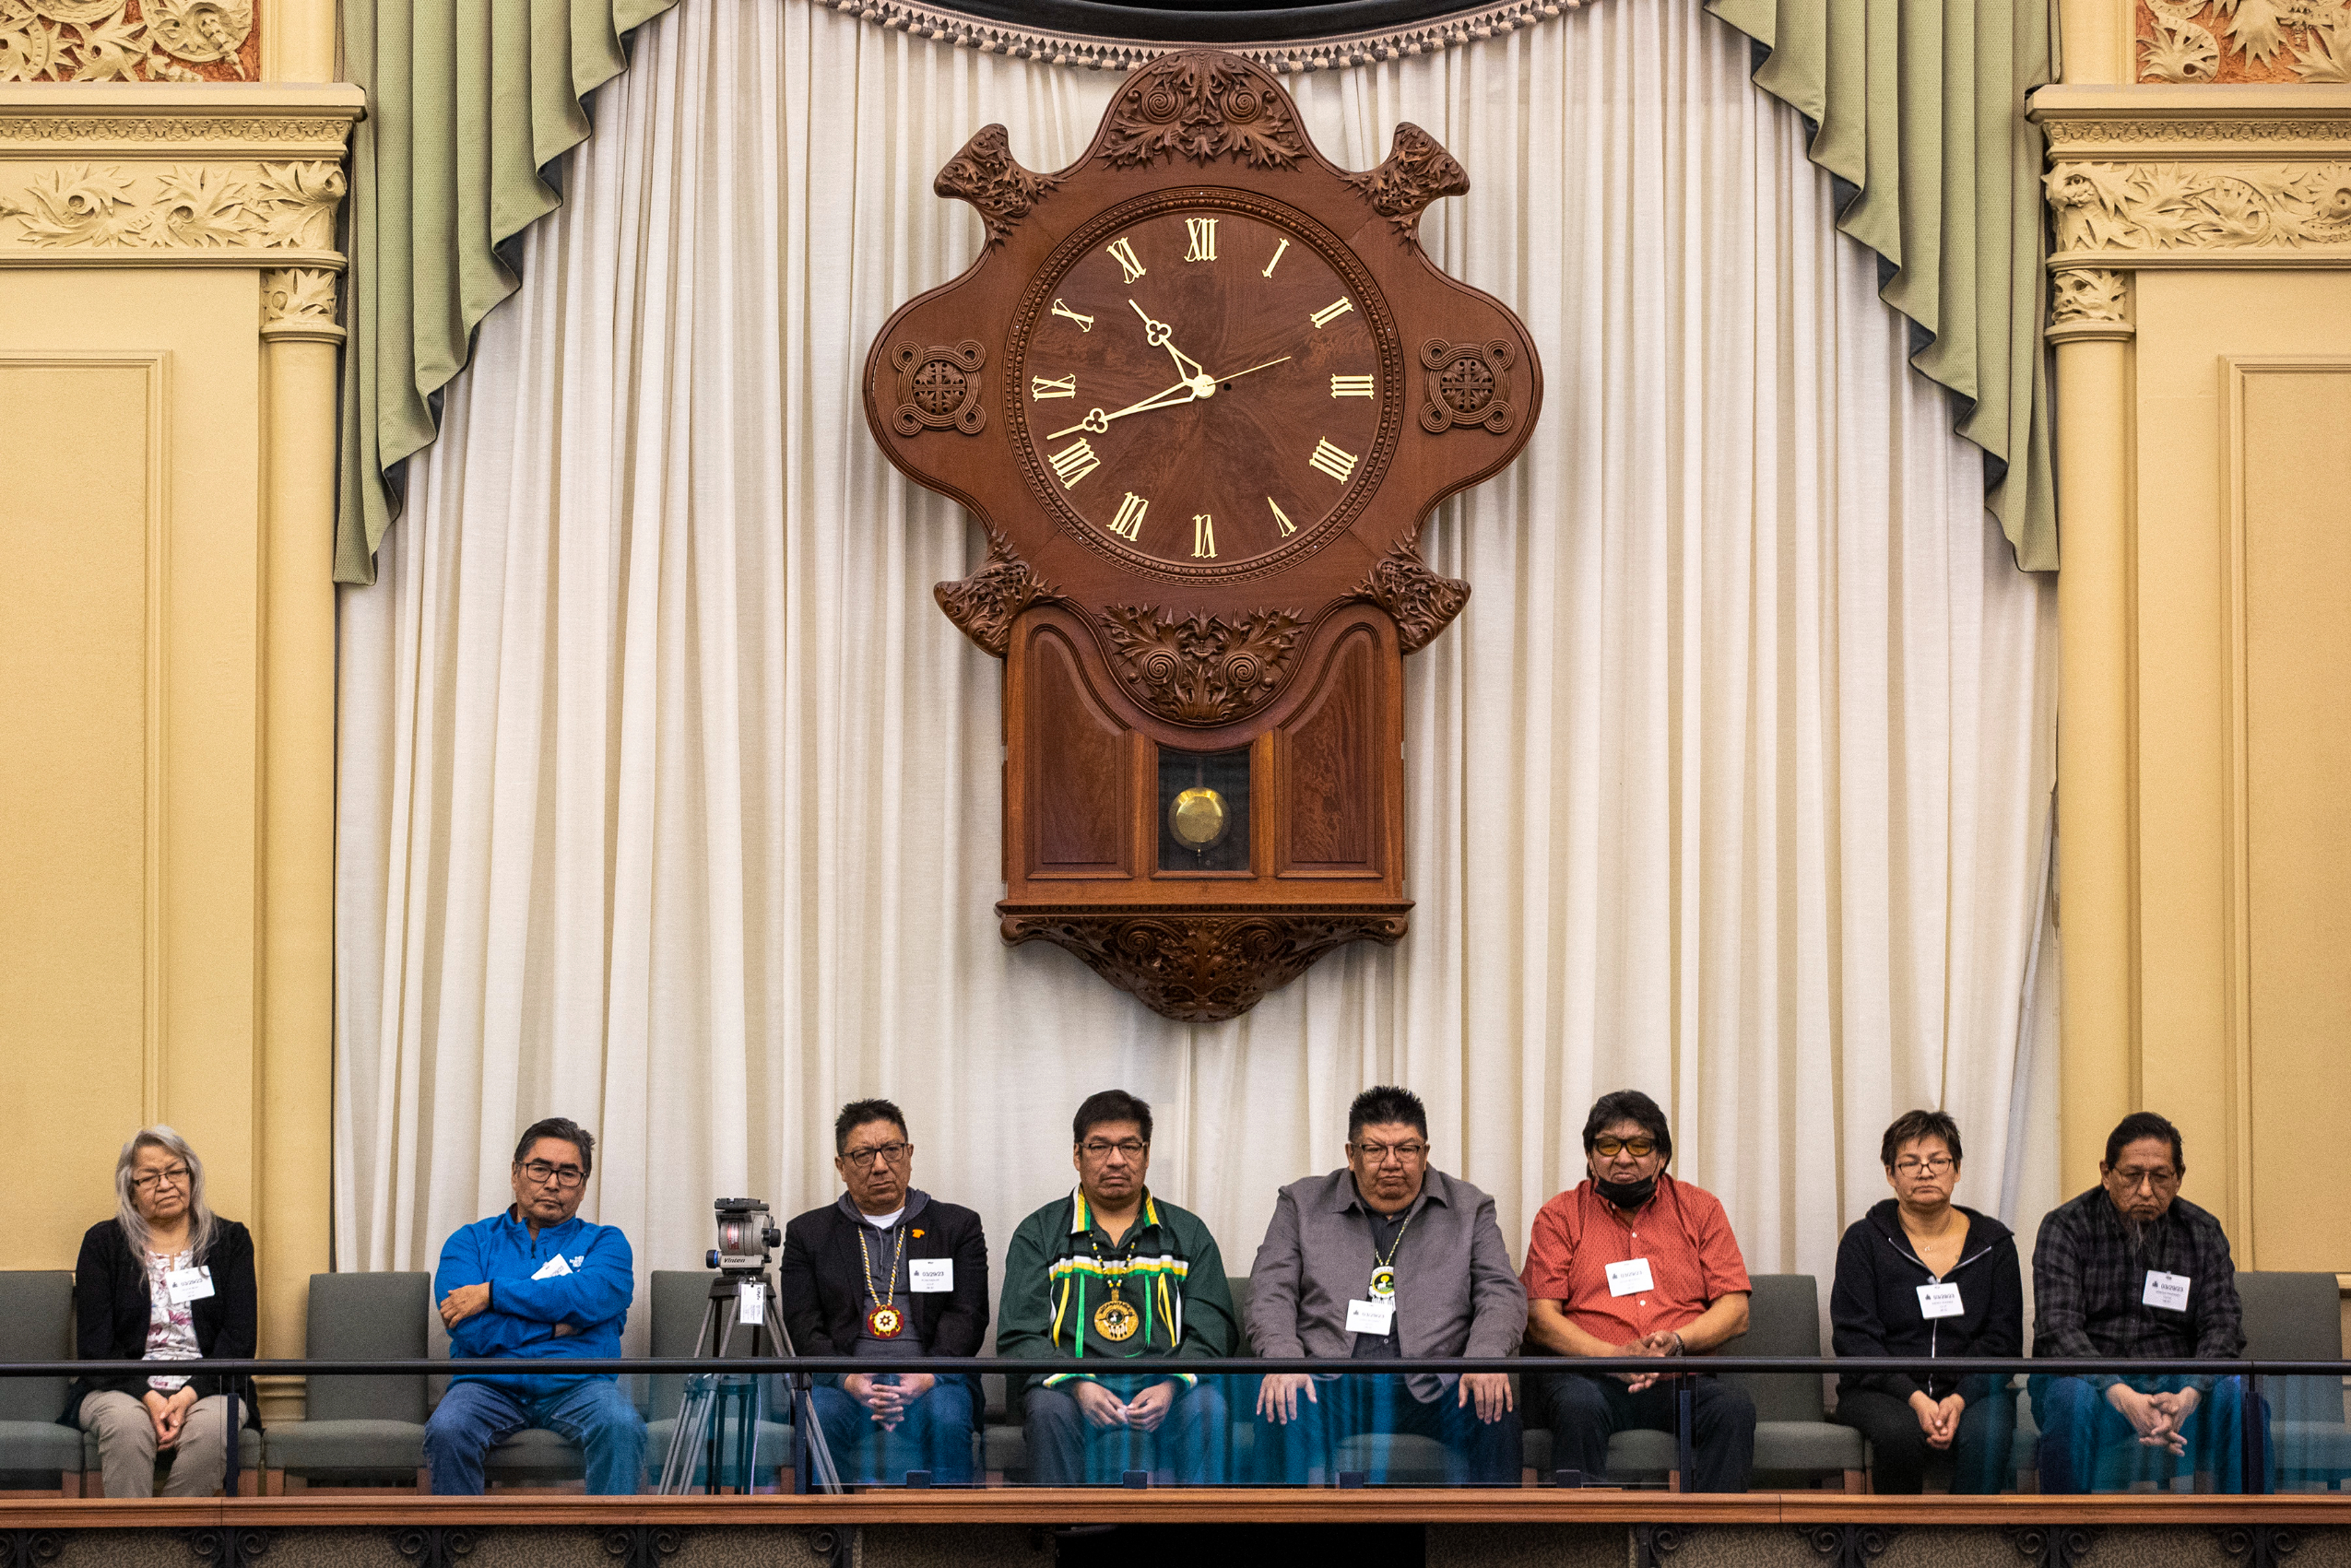 Queen's Park: representatives of four far northern First Nations sit on a balcony at Queen's Park, below a large clock and frilly curtain